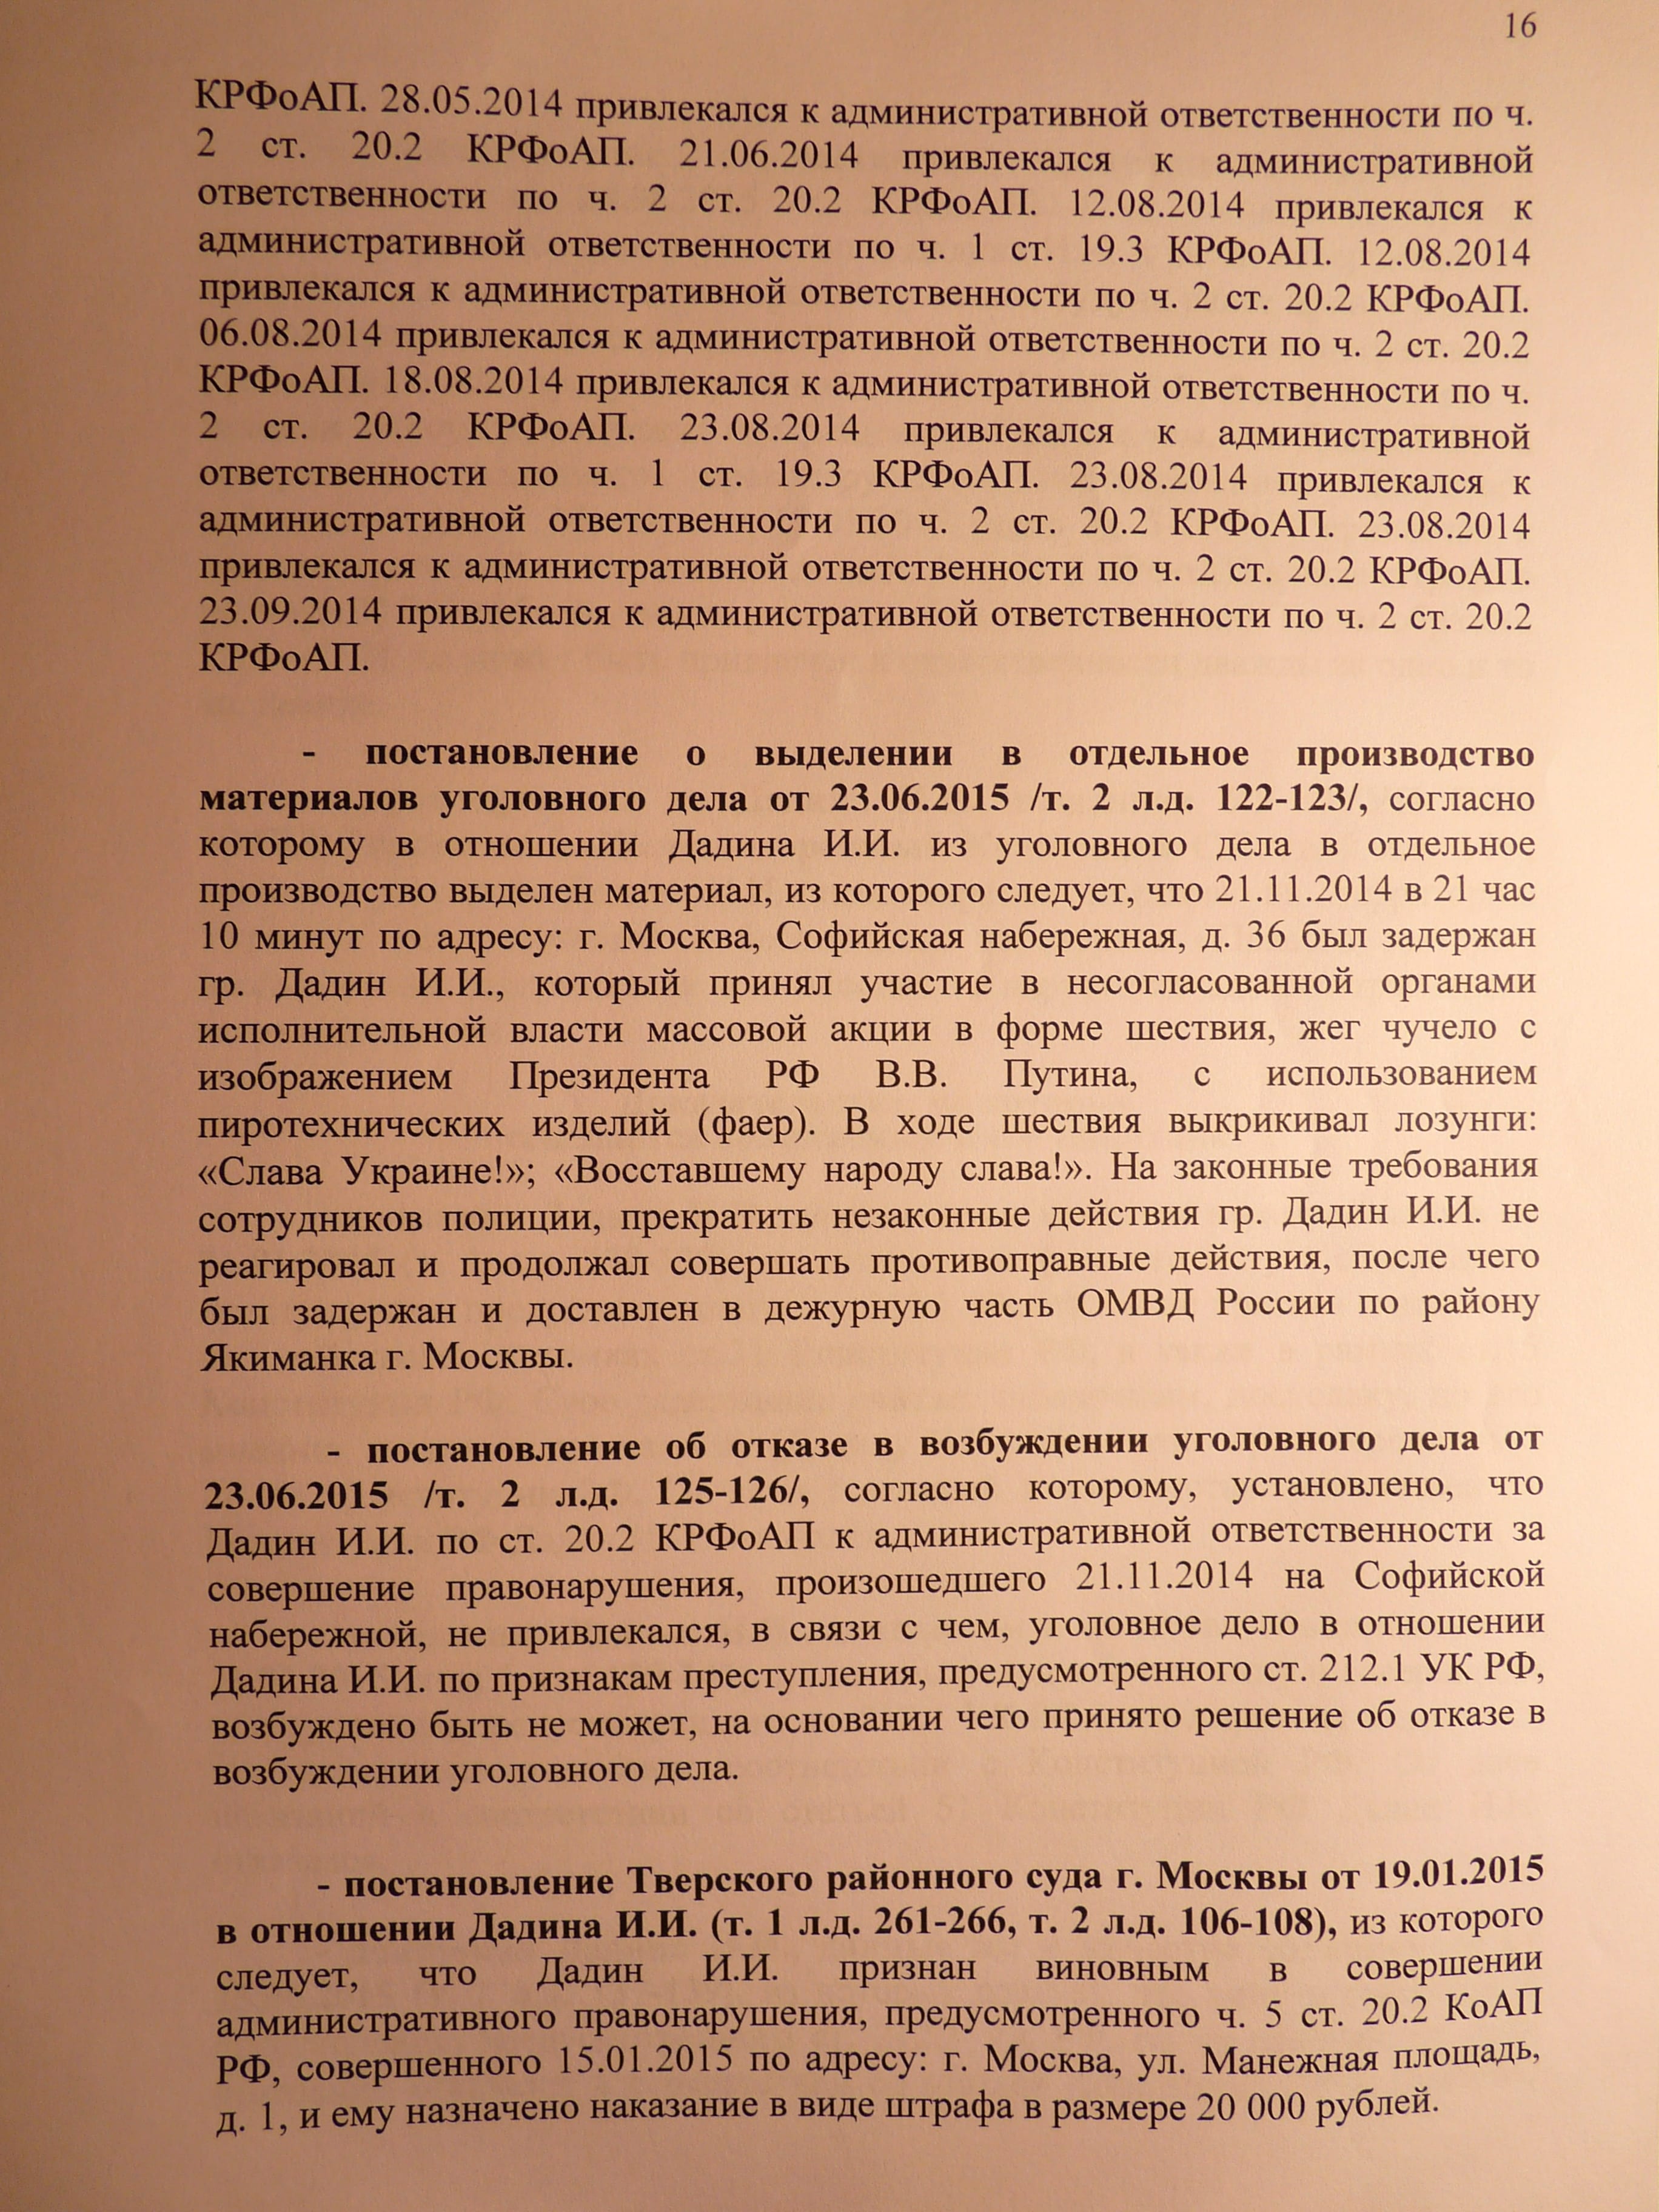 Information from the Database on bringing Dadin I.I. to administrative liability /vol.1 l.d. 43-56/, from which it follows …